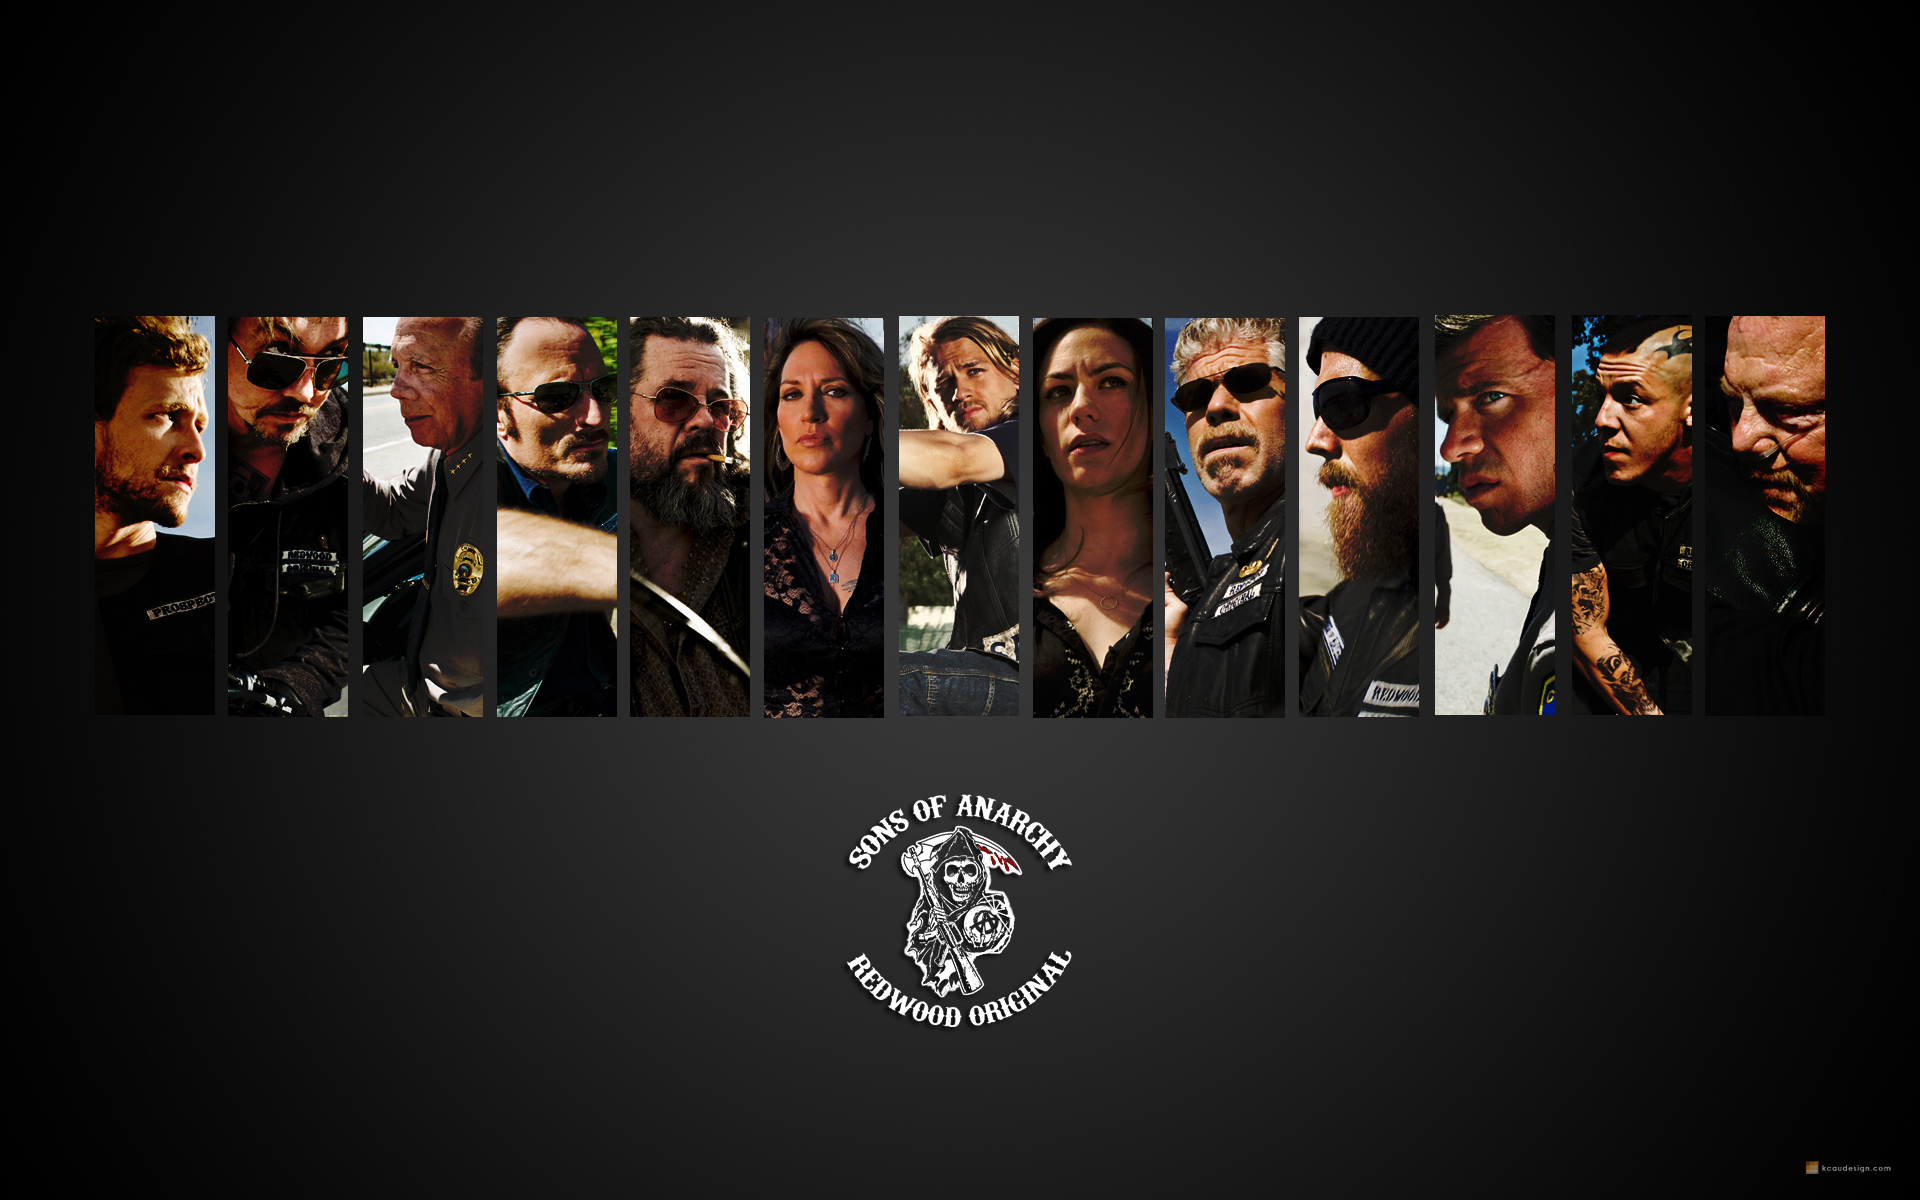 Sons Of Anarchy - Sons Of Anarchy Wallpaper (10772171) - Fanpop ...